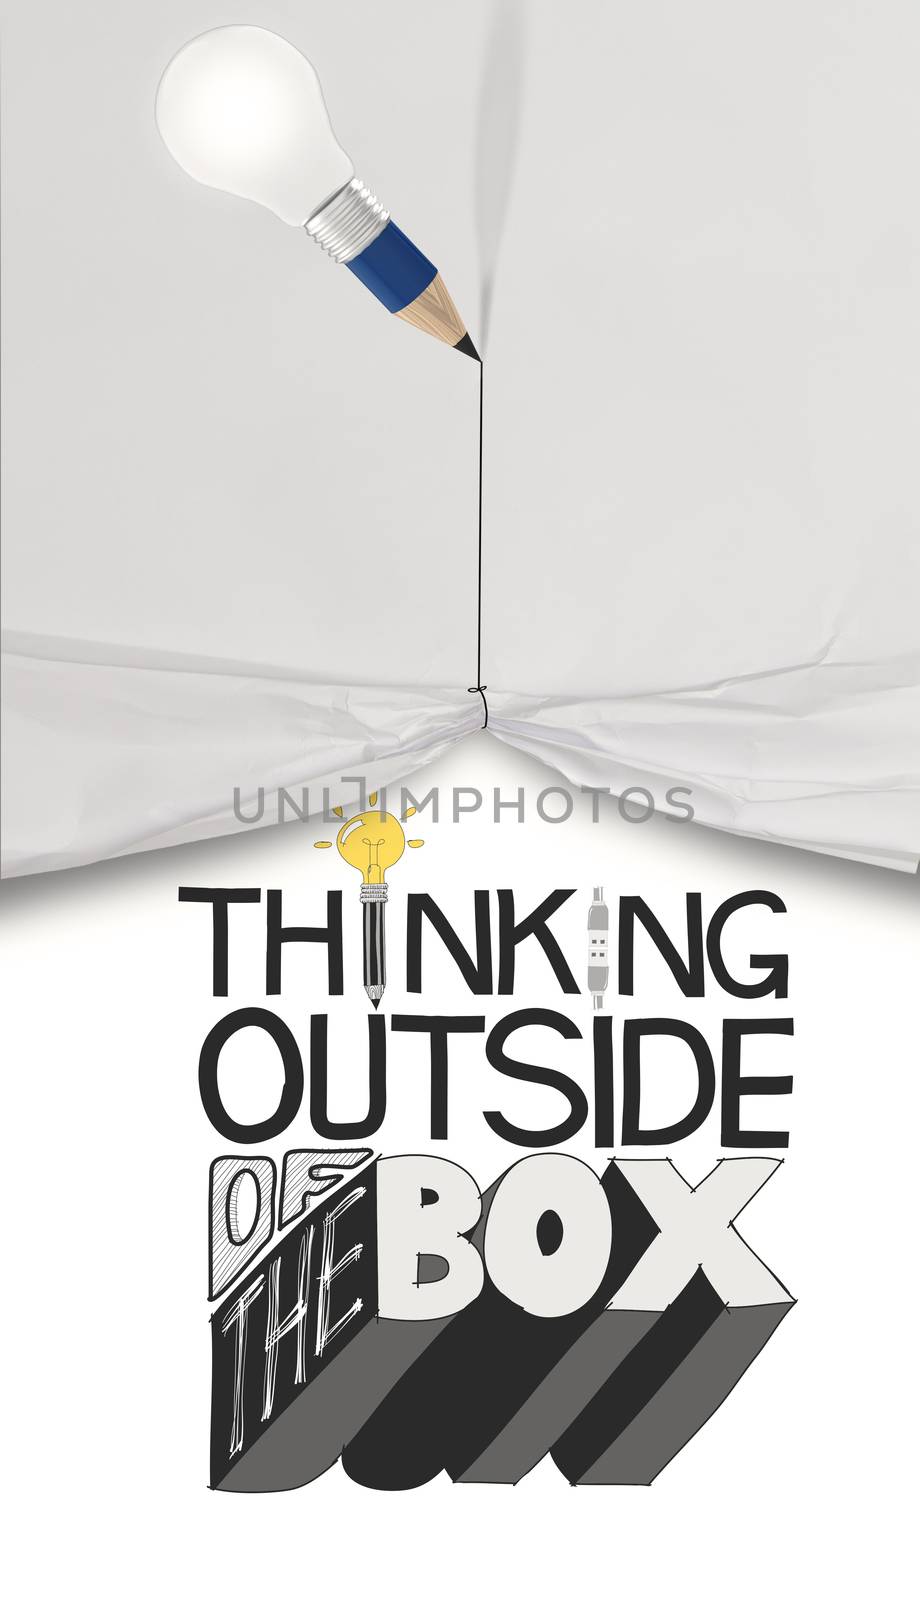 pencil lightbulb 3D draw rope open wrinkled paper show graphic design word THINKING OUTSIDE THE BOX as concept